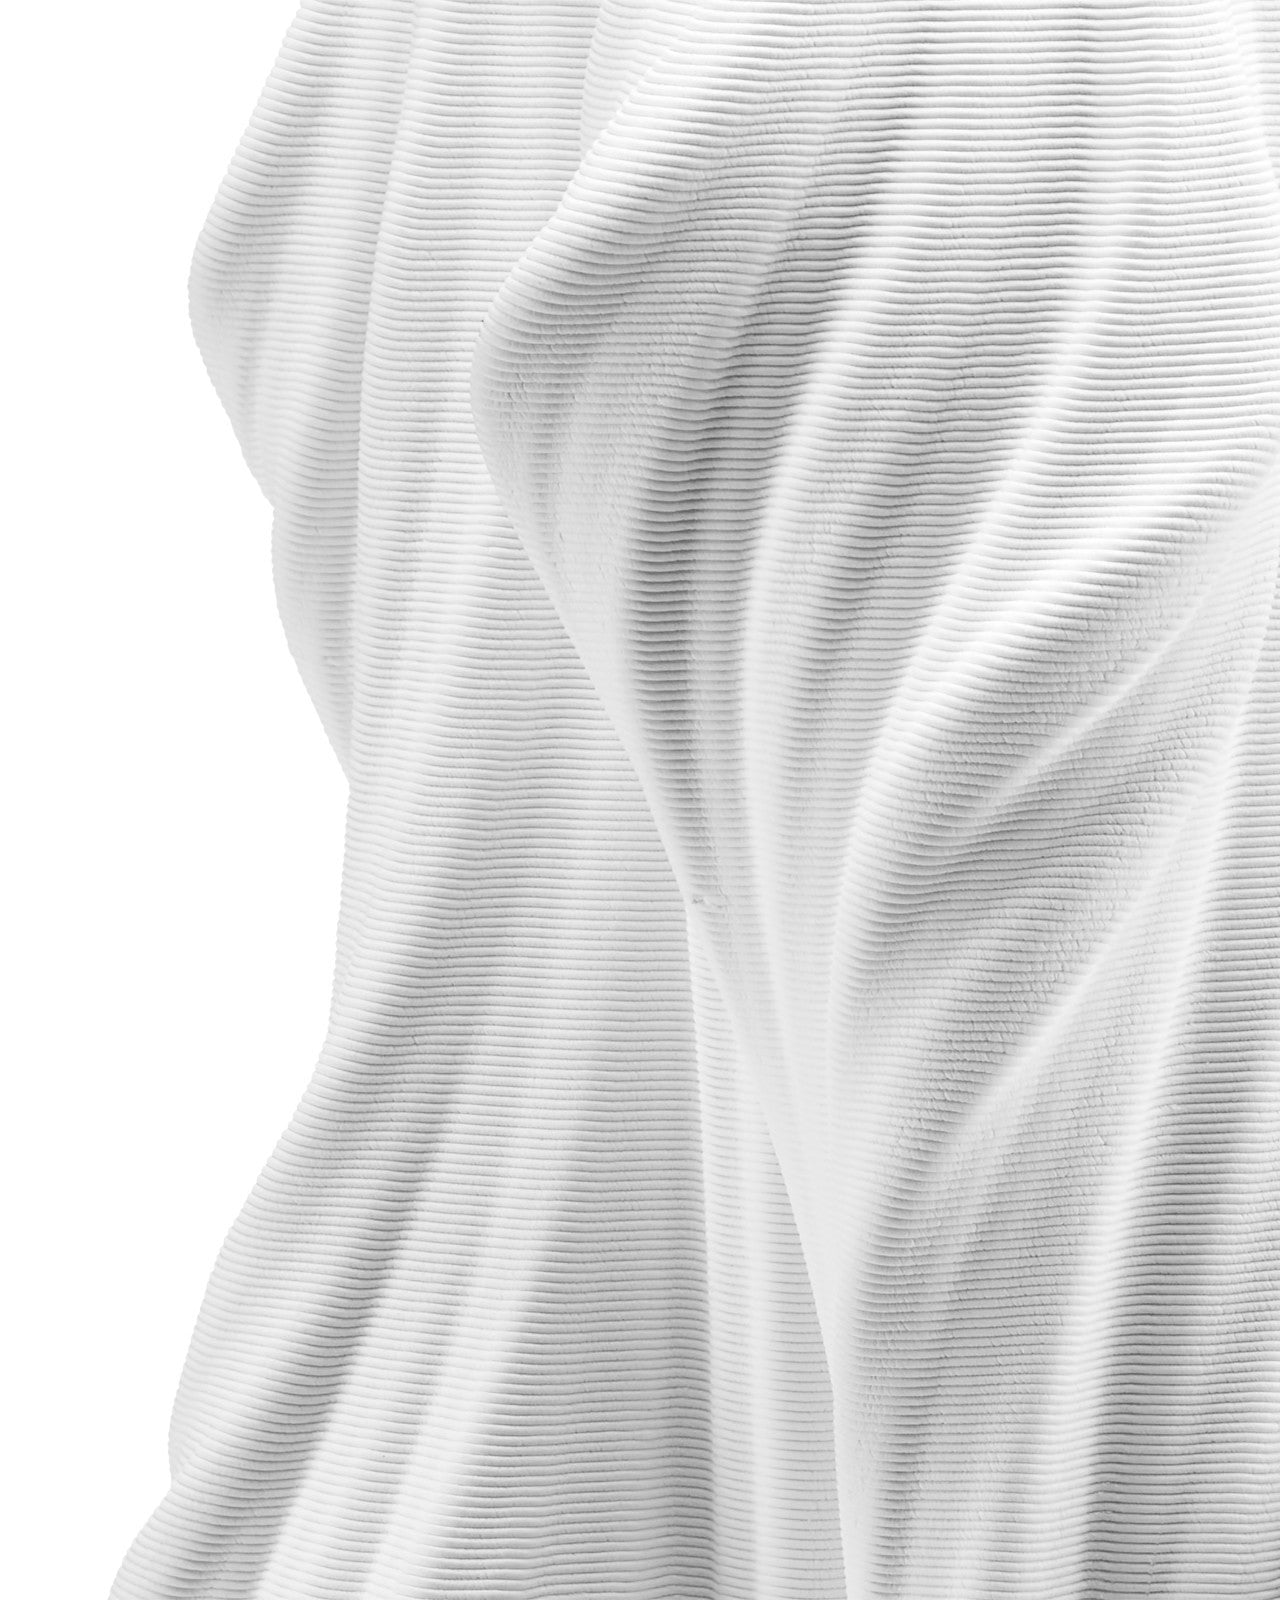 VASE WHITE WAVES (Available in 2 Sizes)